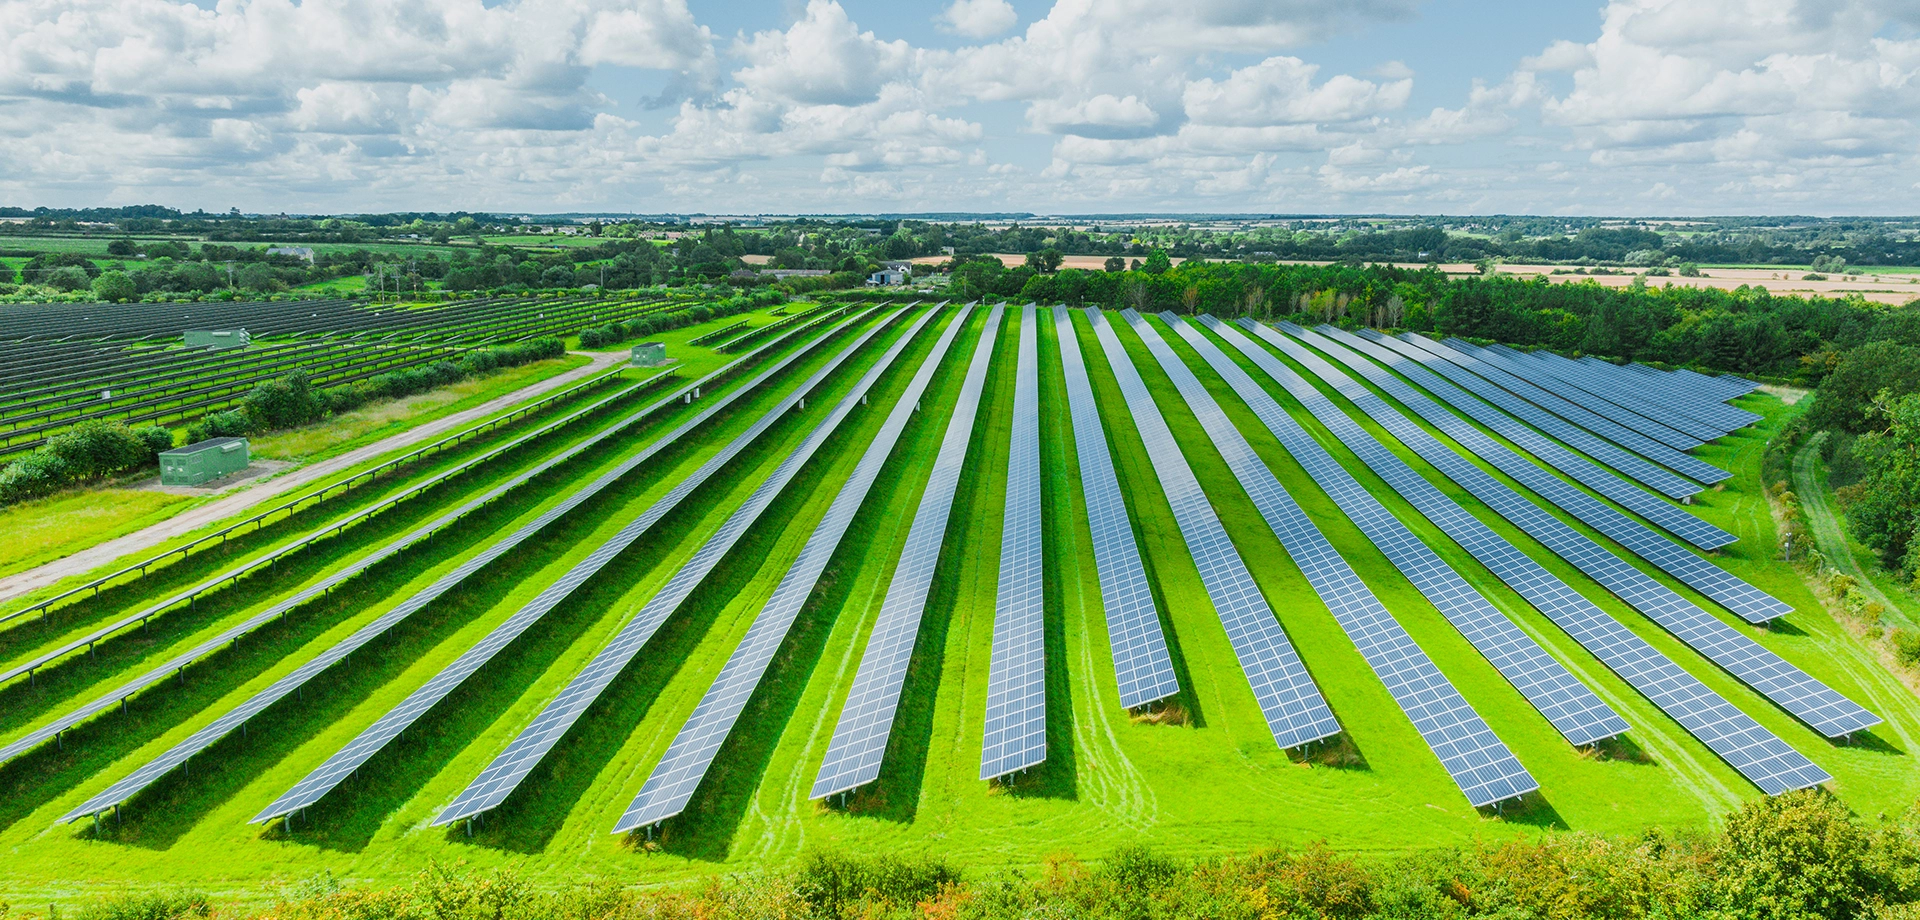 Lines of solar panels in a field